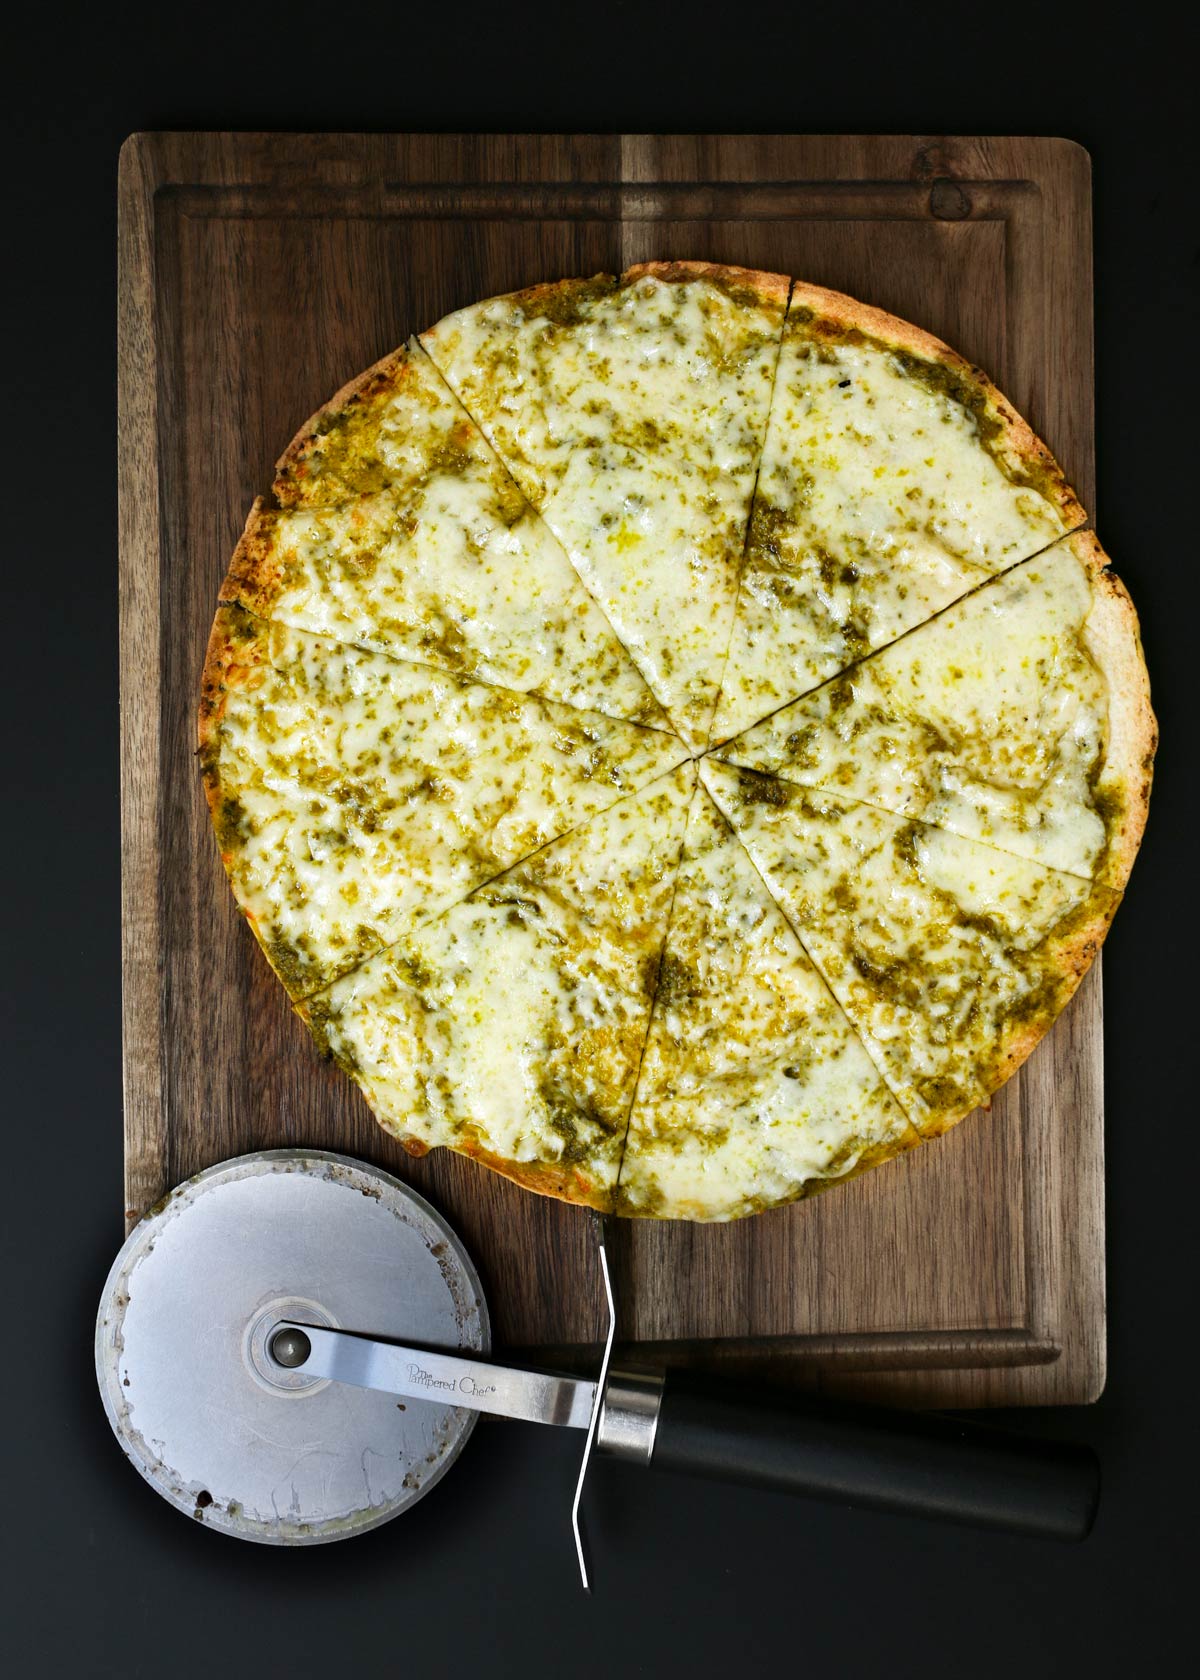 tortilla pizza with pesto on dark wood board sliced with pizza wheel on the board.